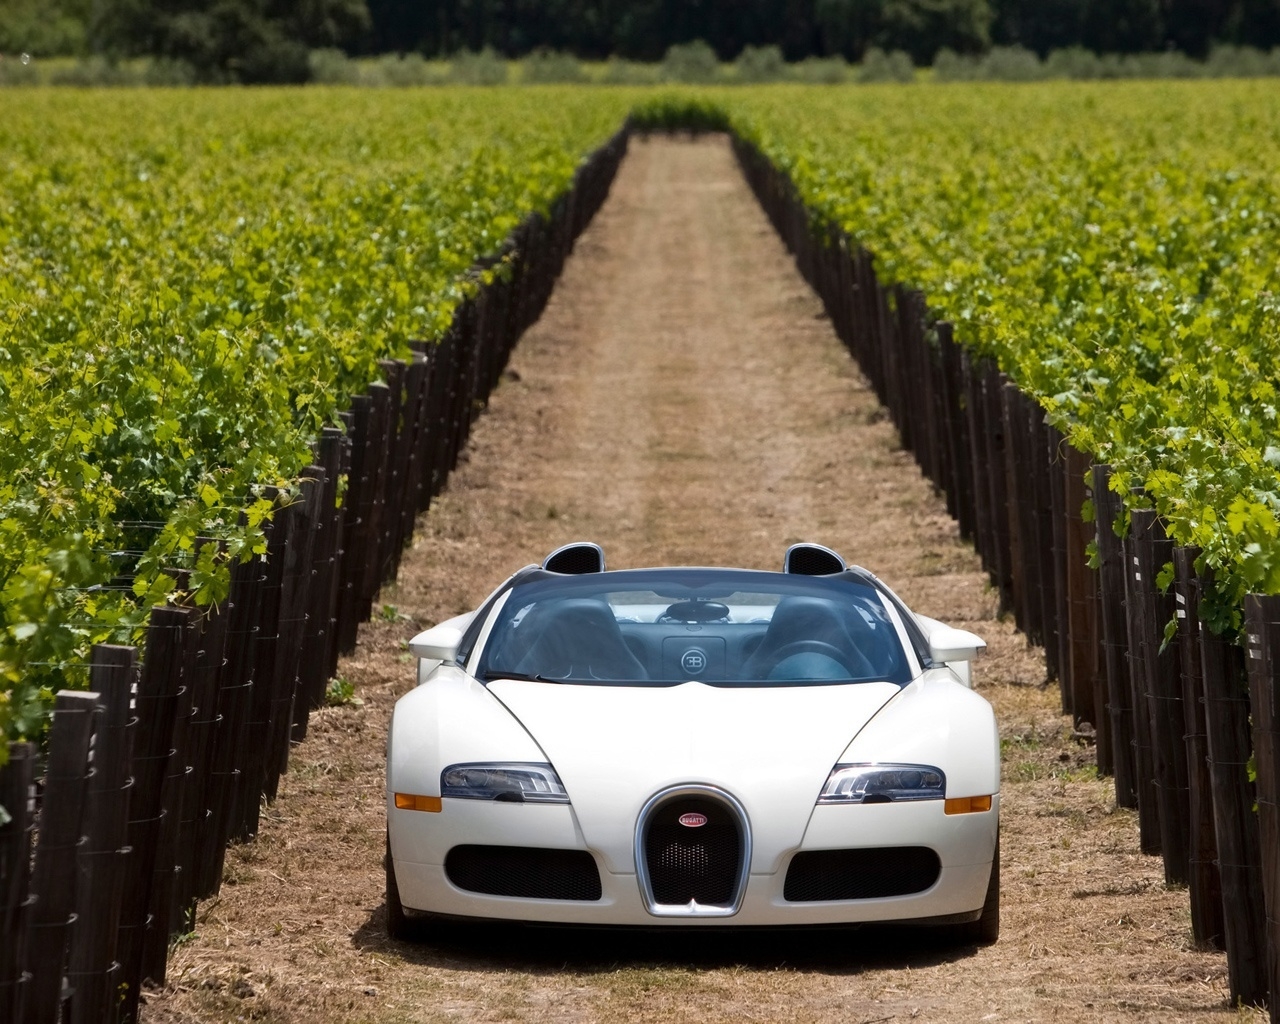 Bugatti Veyron 16.4 Grand Sport 2010 in Napa Valley - Front 3 for 1280 x 1024 resolution